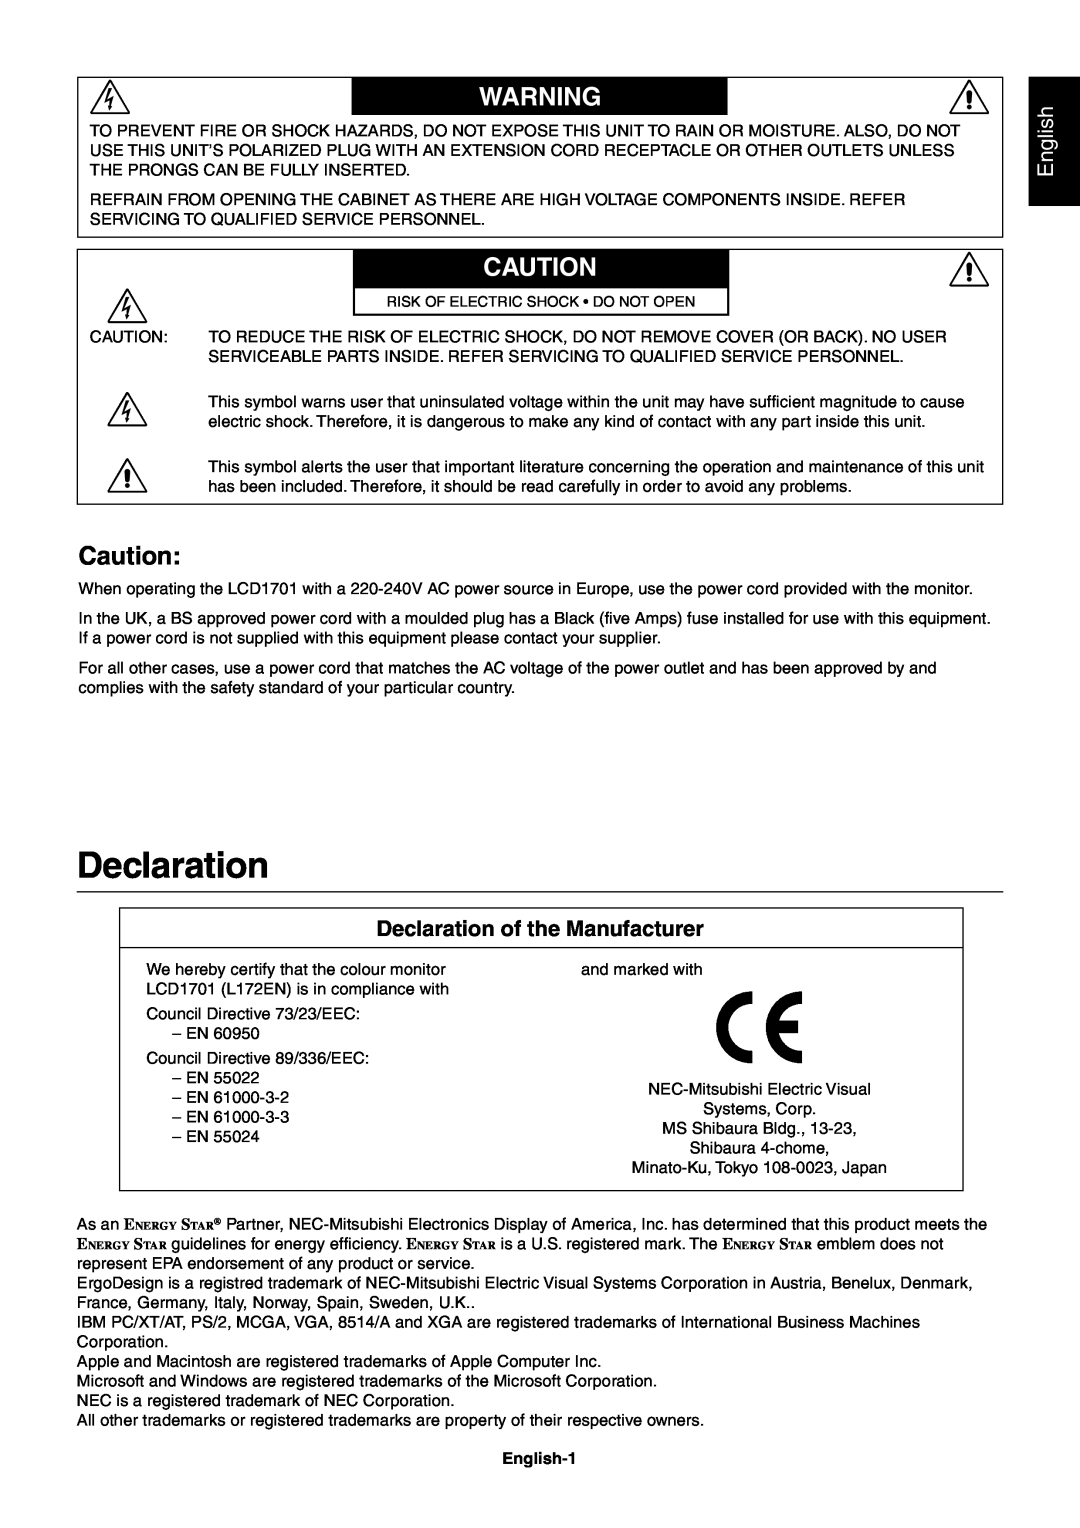 NEC LCD1701 user manual English, Declaration of the Manufacturer 